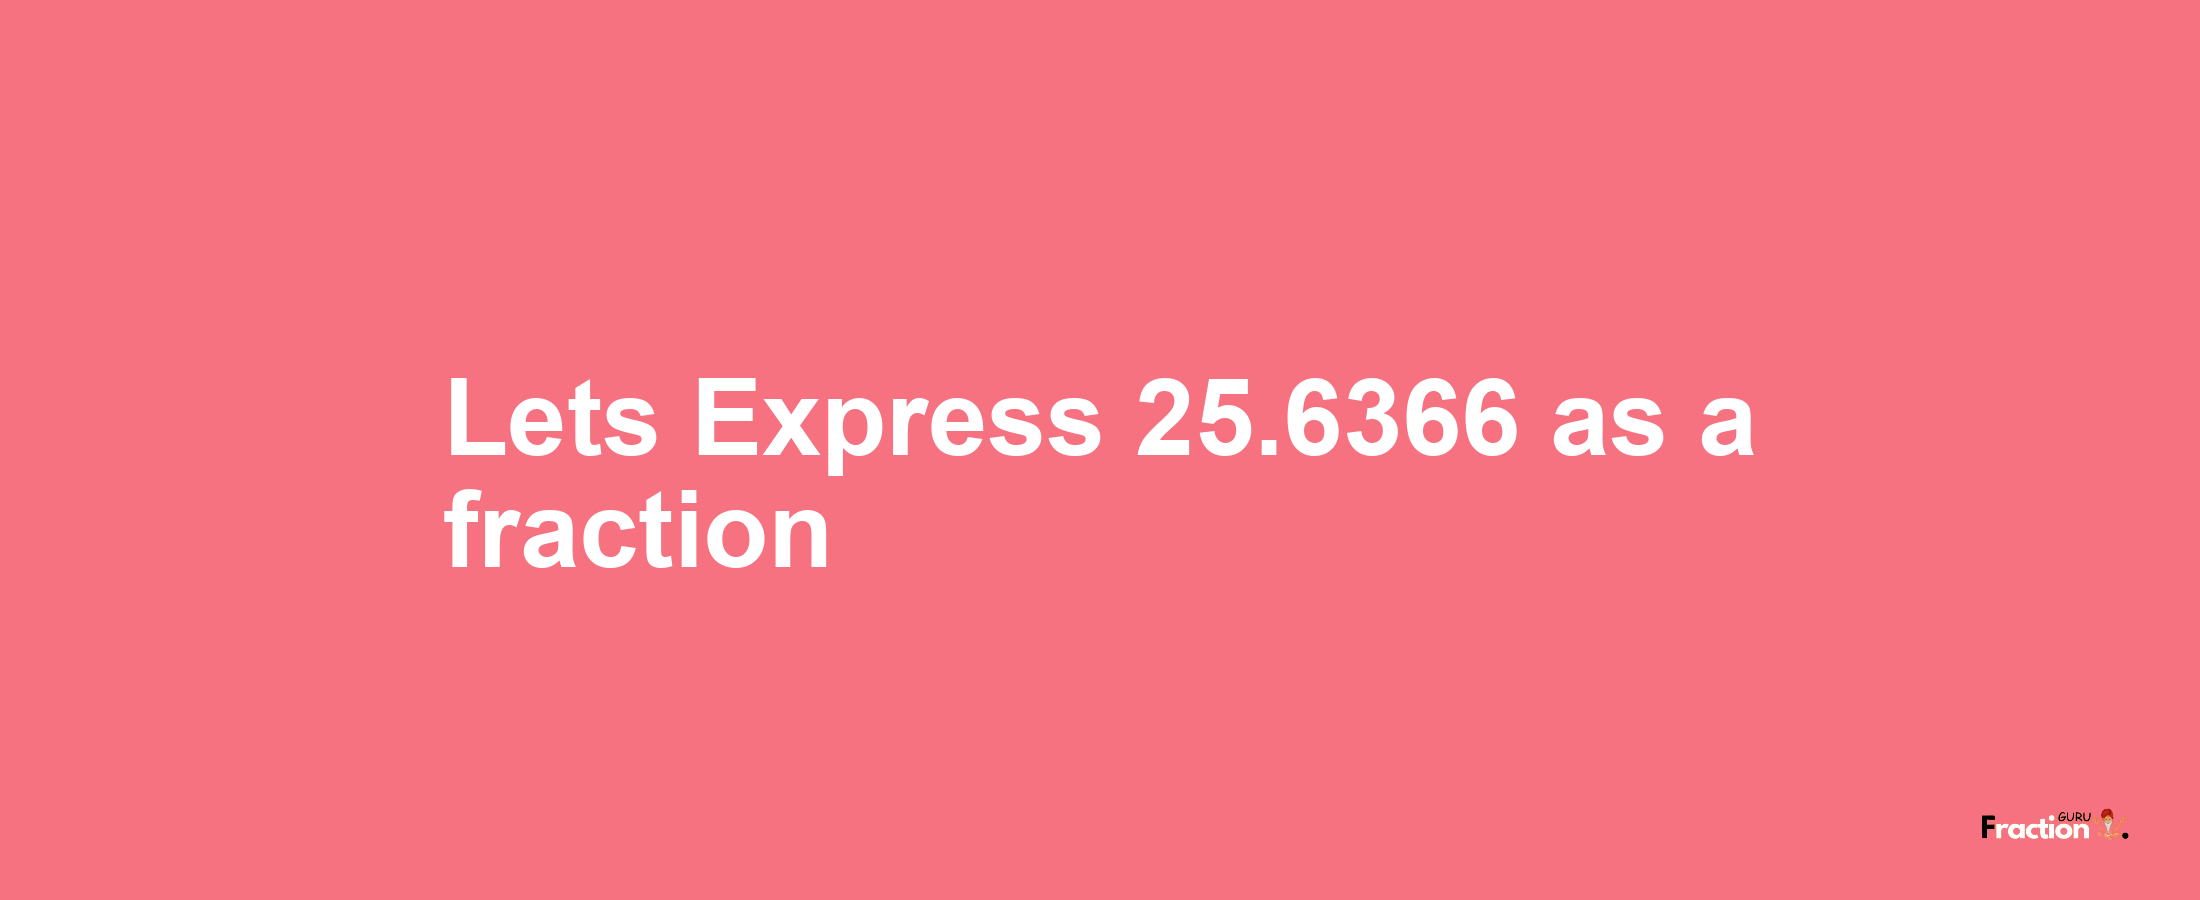 Lets Express 25.6366 as afraction